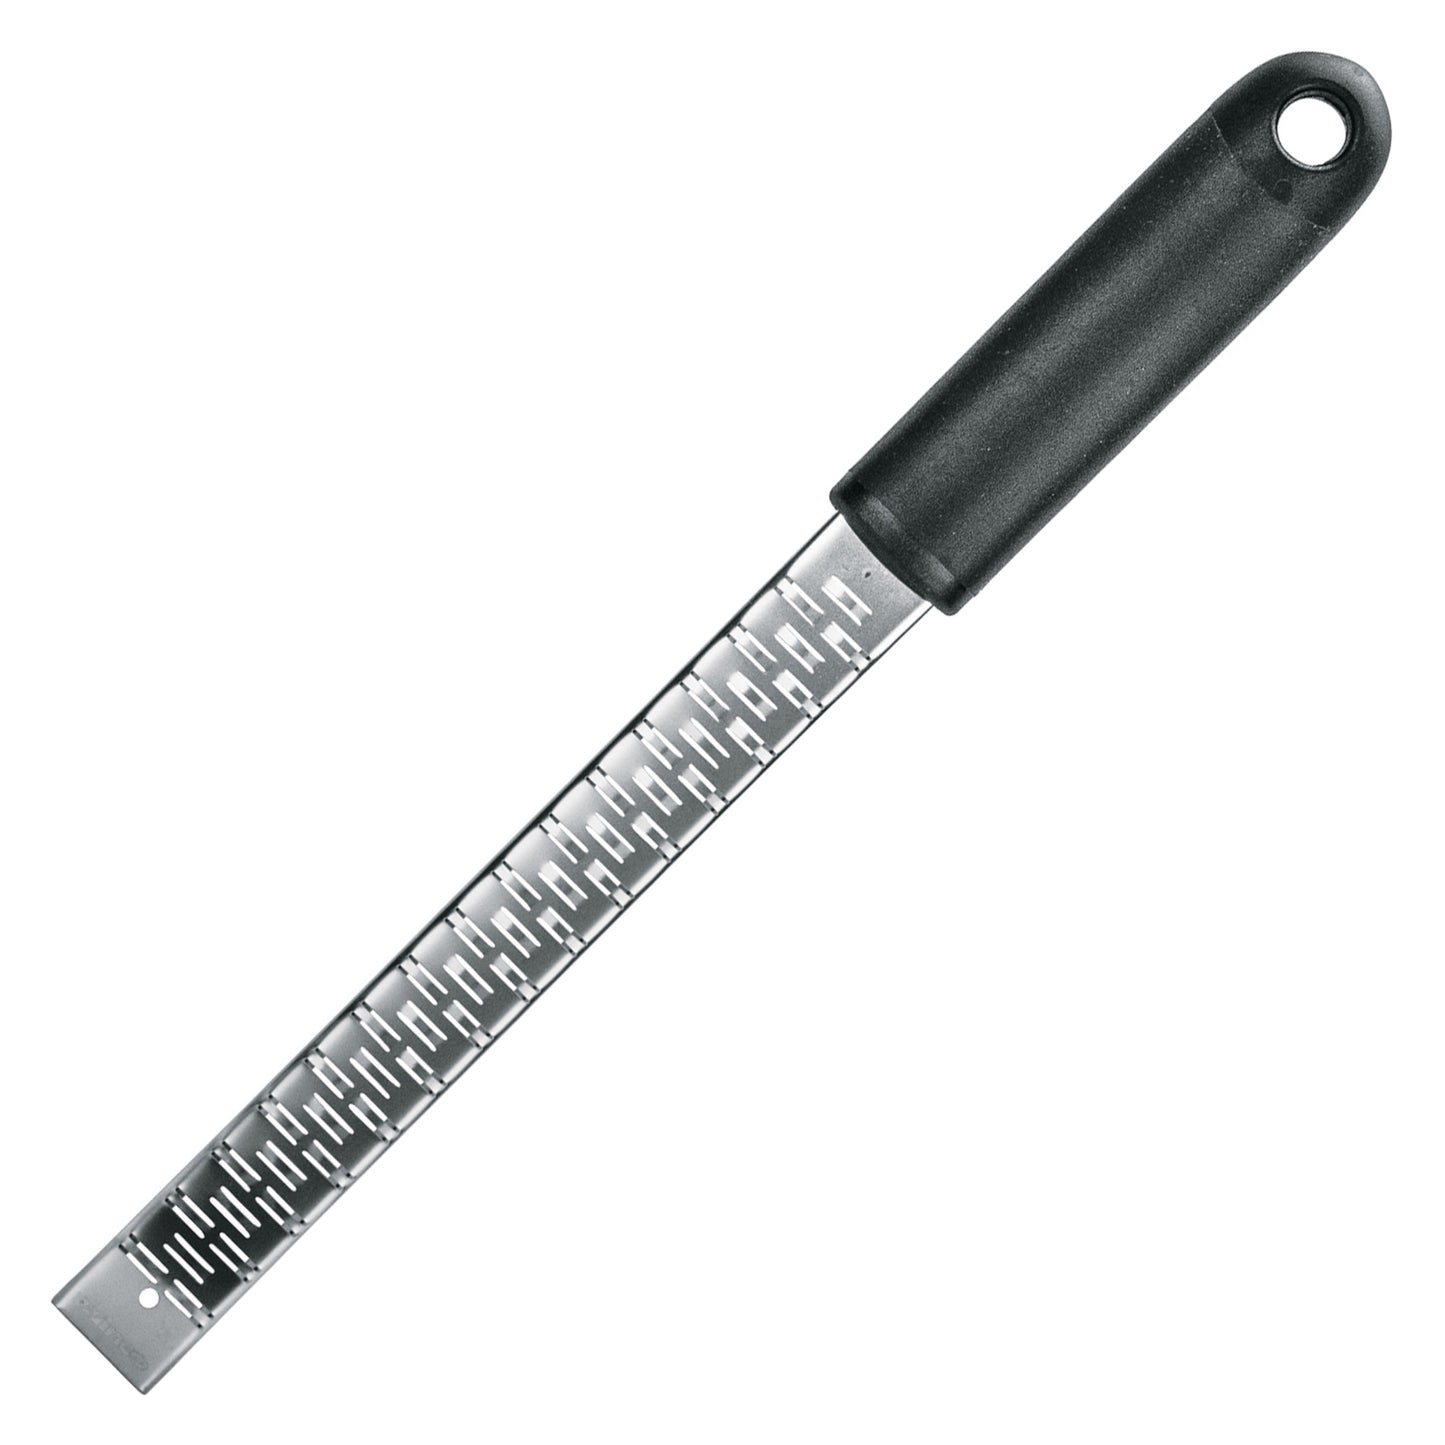 Grater with Soft Grip Handle - Ribbon